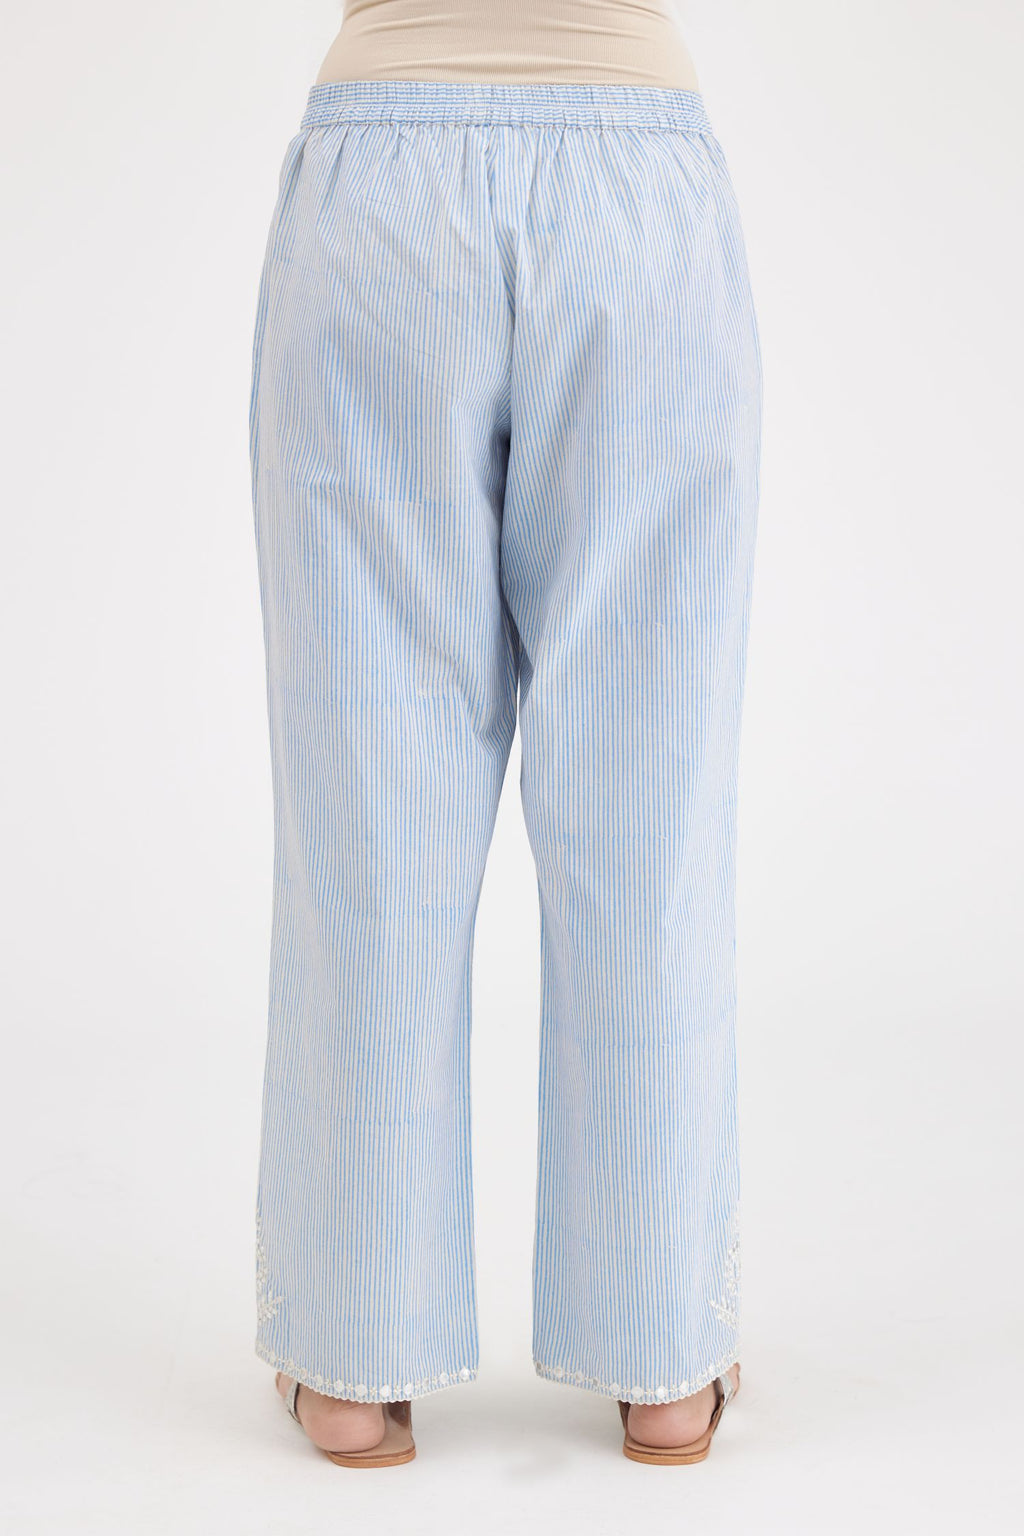 Hand-block printed striped Cotton comfortable fit pant with elasticated back and frontal drawstrings.